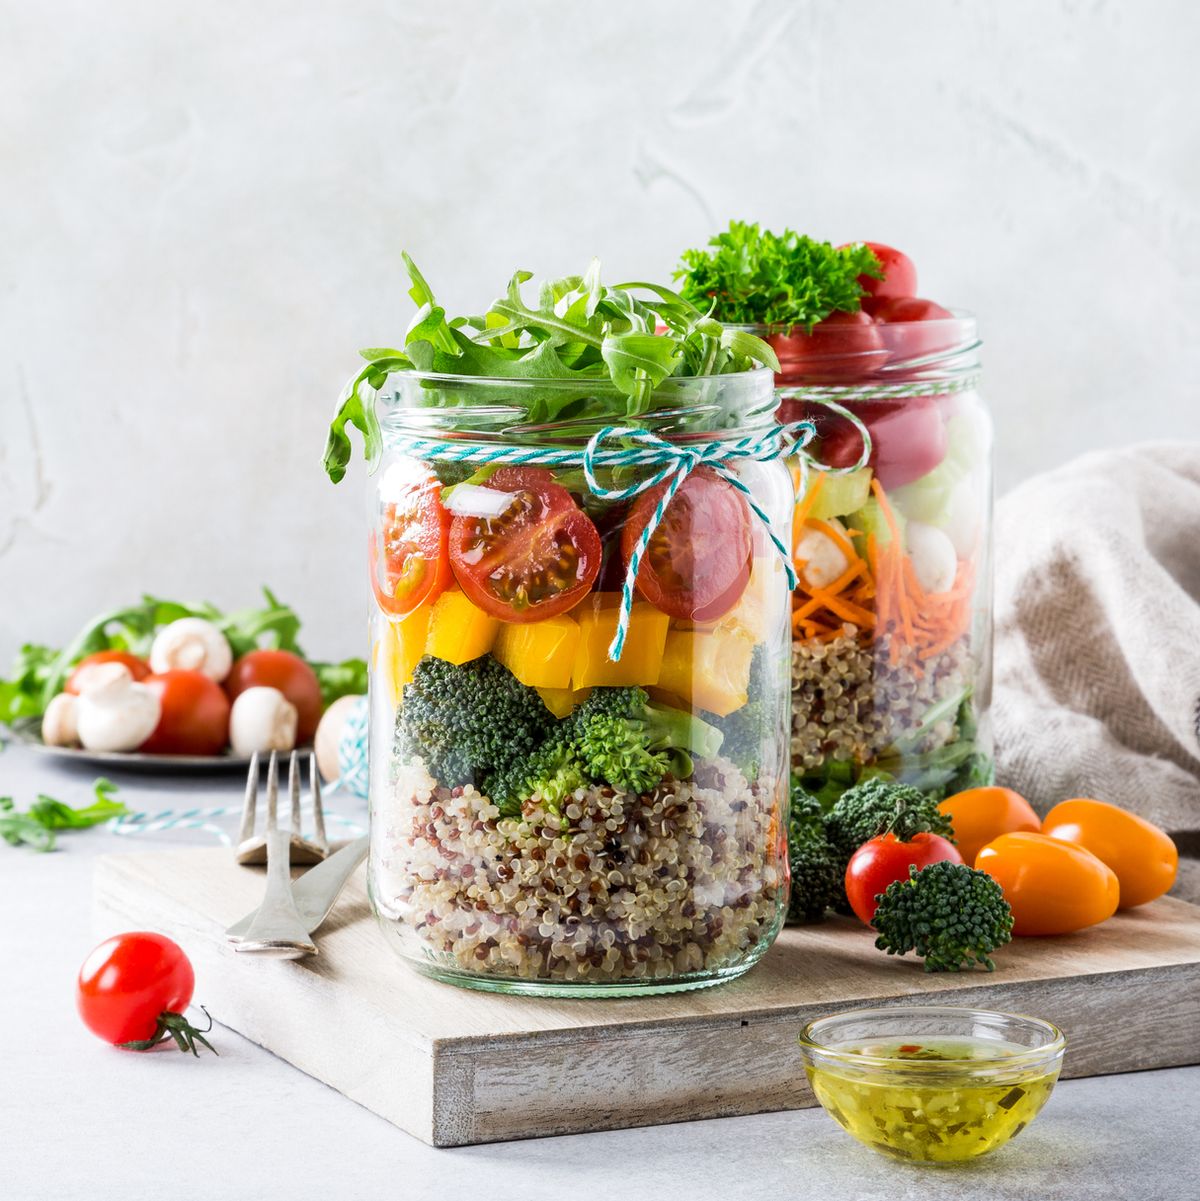 Salad in glass jar with quinoa